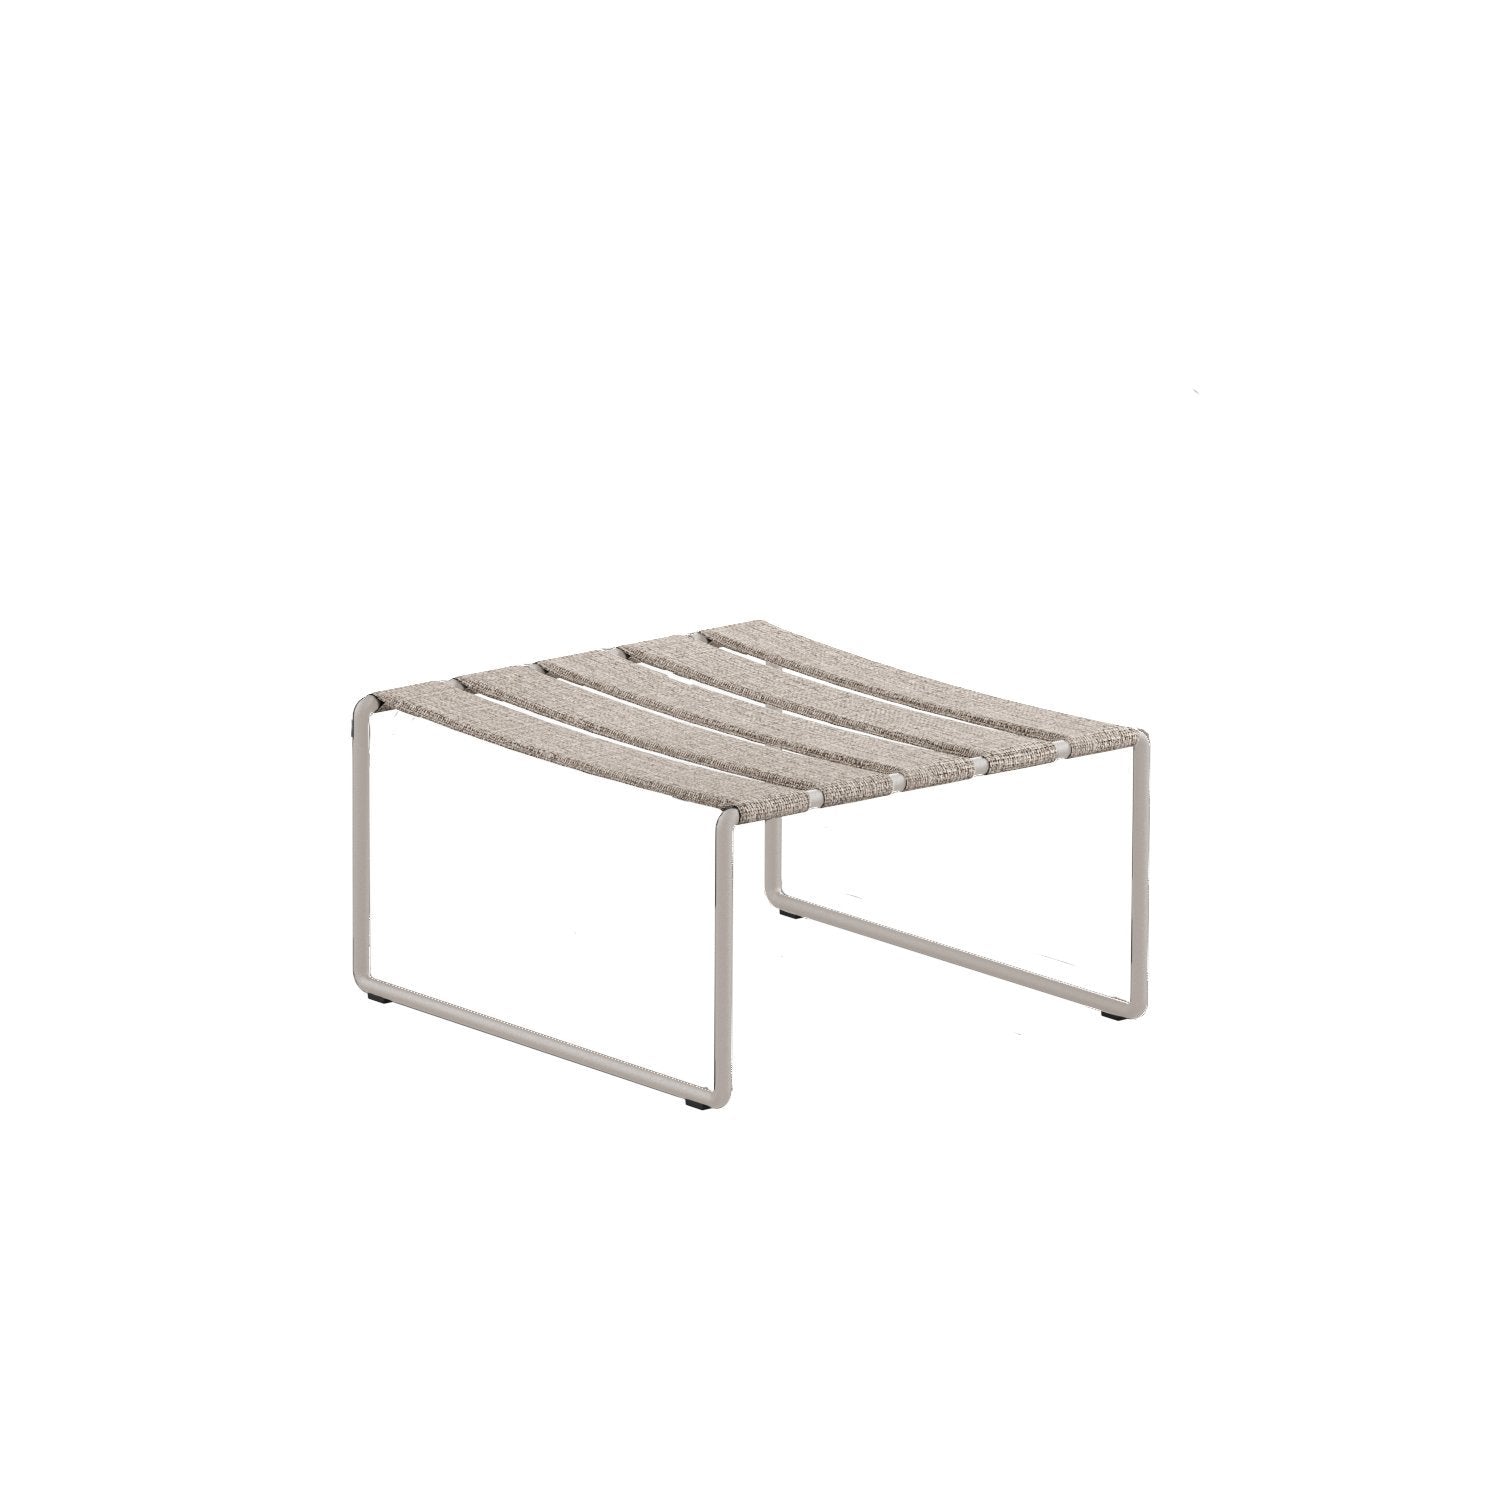 Strappy footrest with mushroom frame